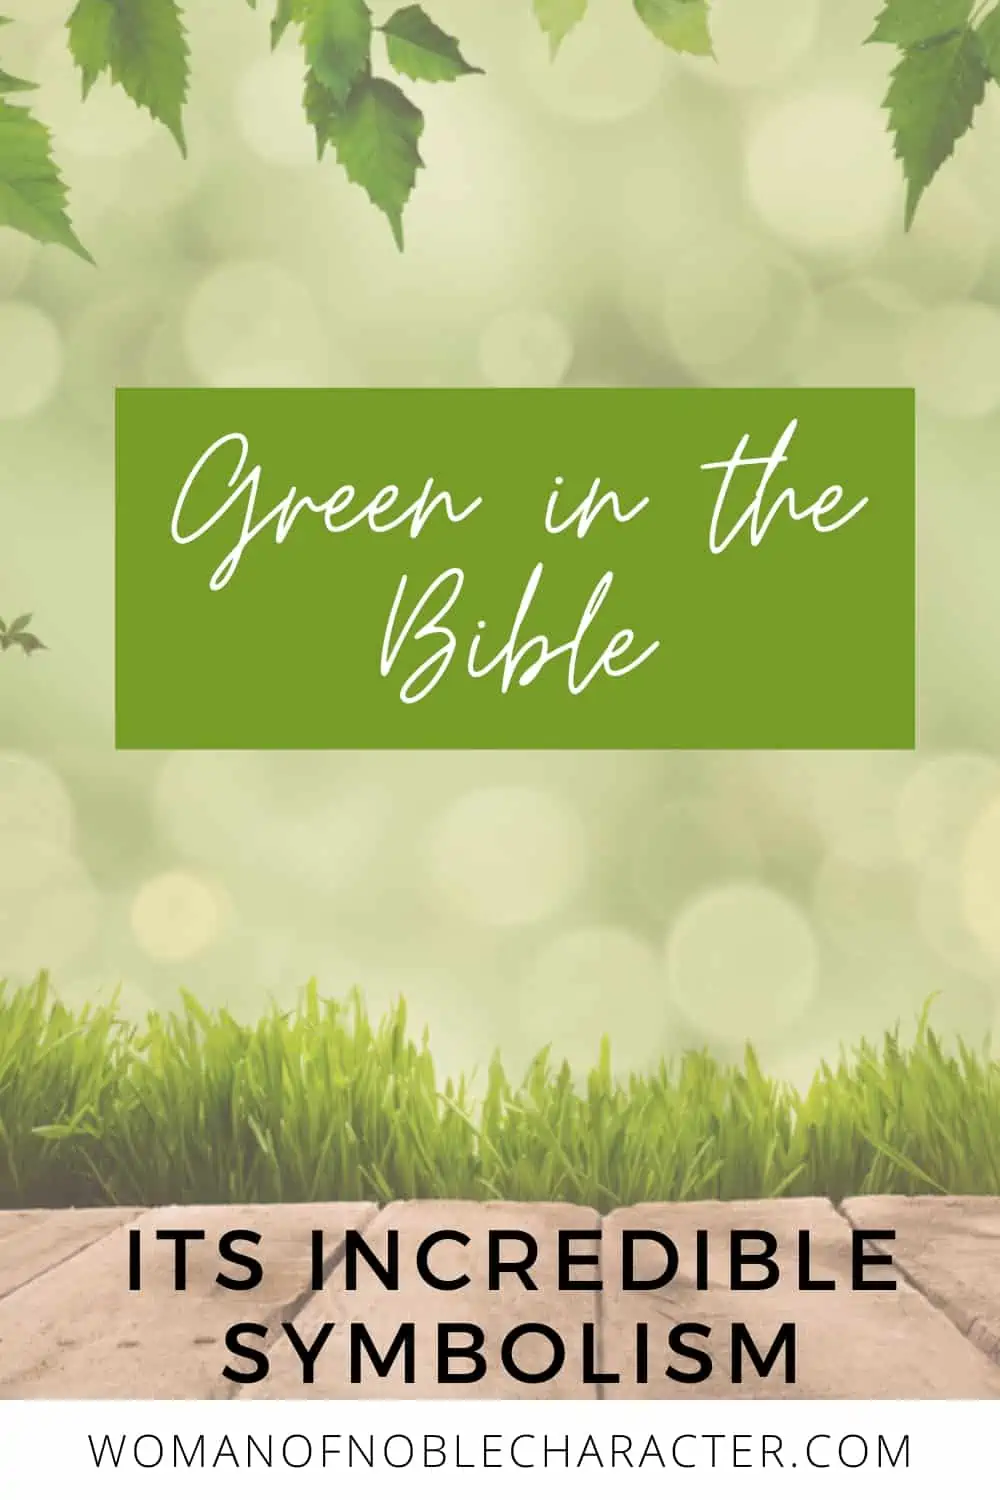 image of green leaves for the post on green in the Bible